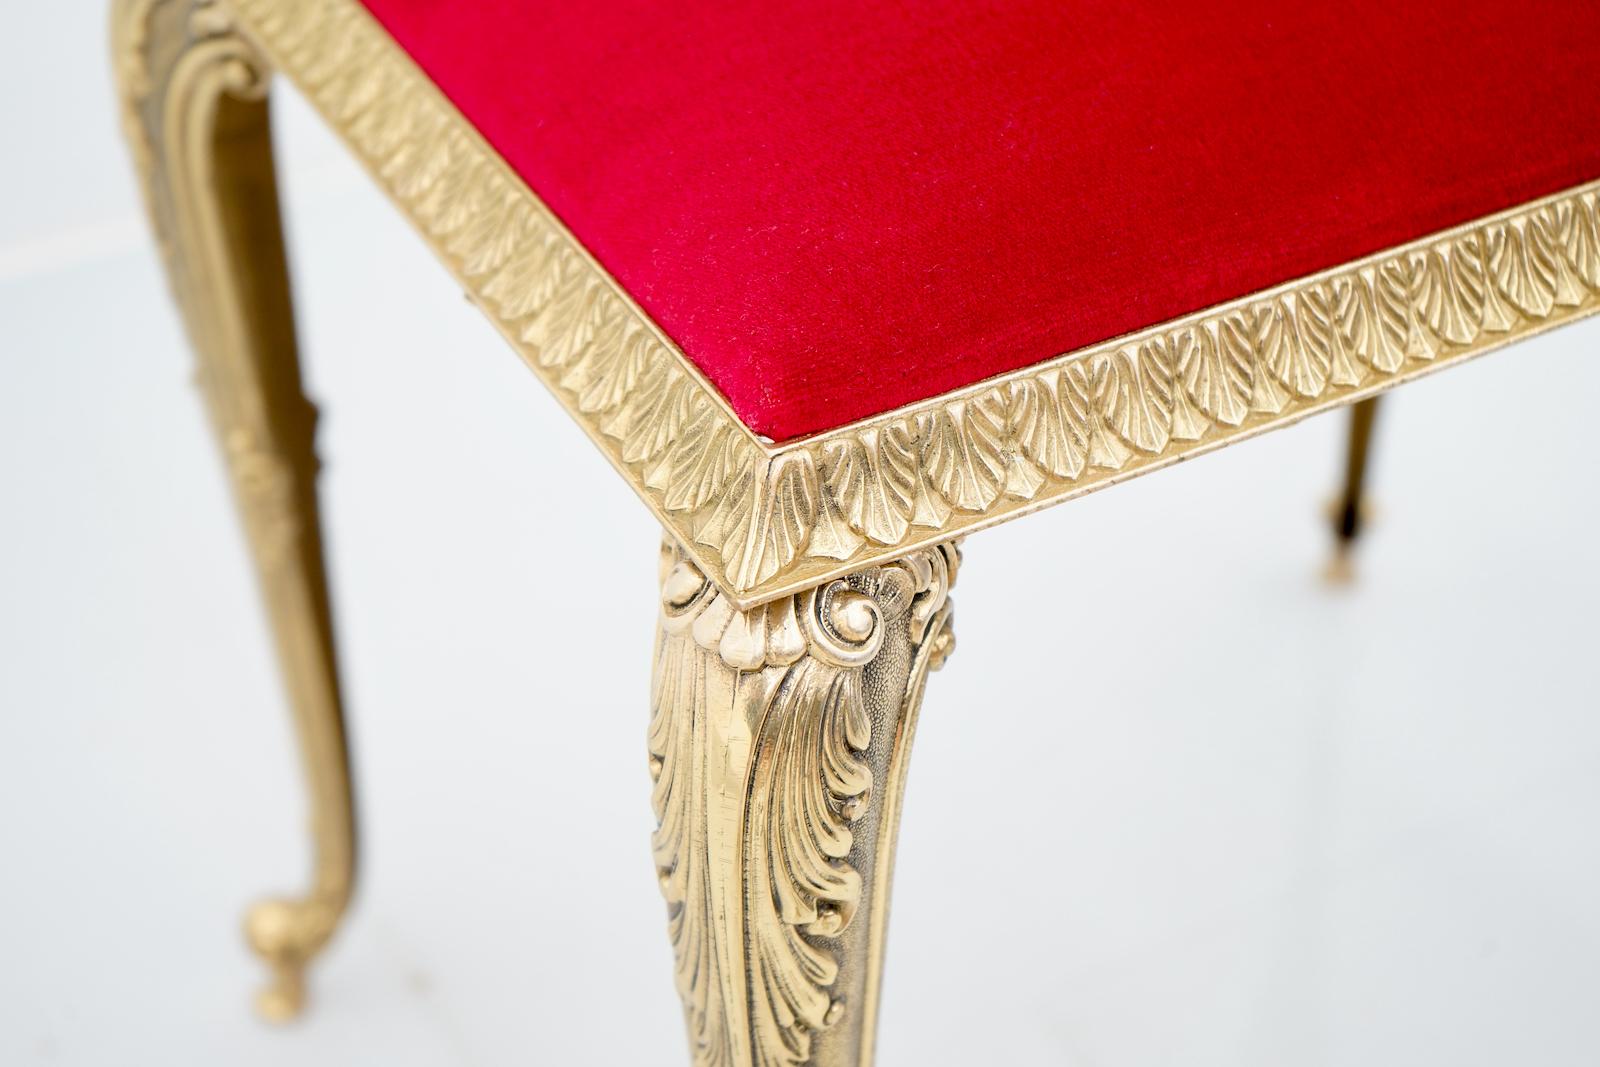 Very decorative brass stool with a red velvet fabric. Very good condition.